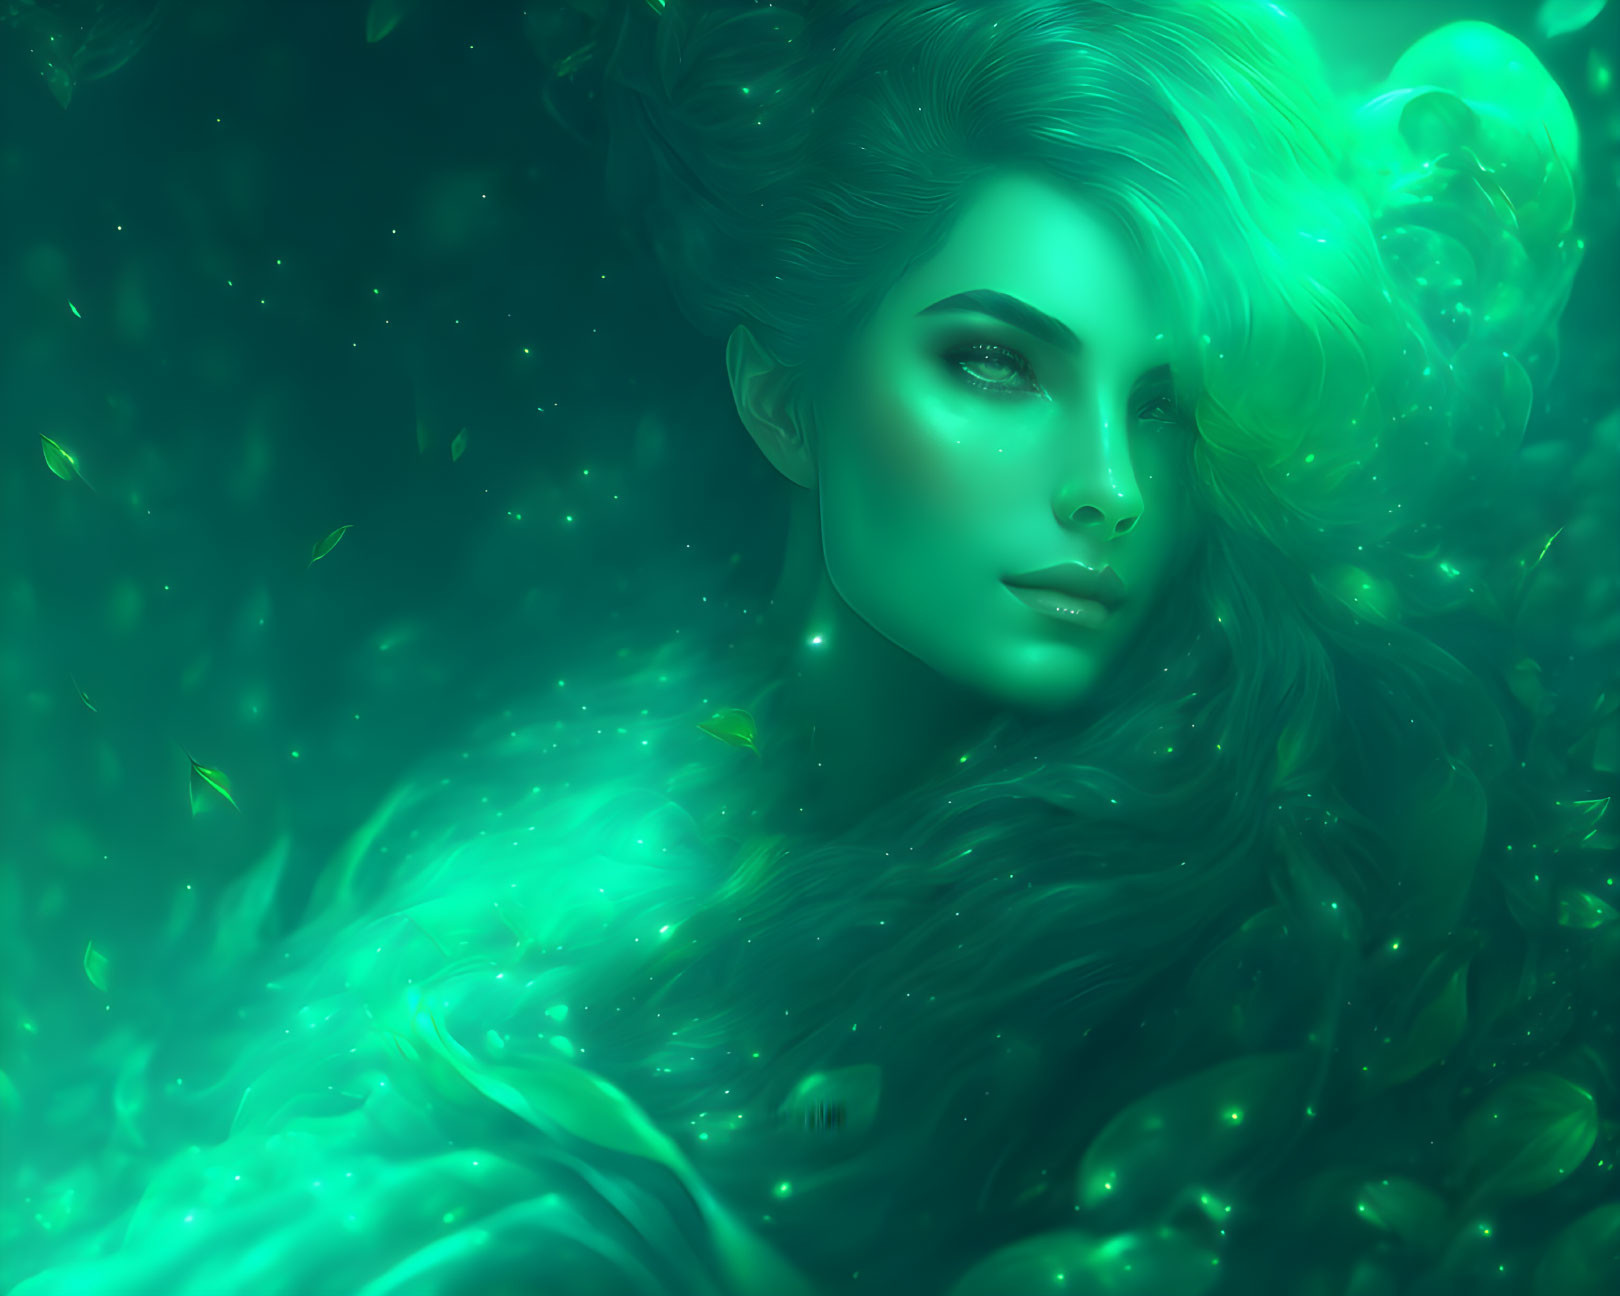 Mystical woman with flowing hair in glowing green ambiance